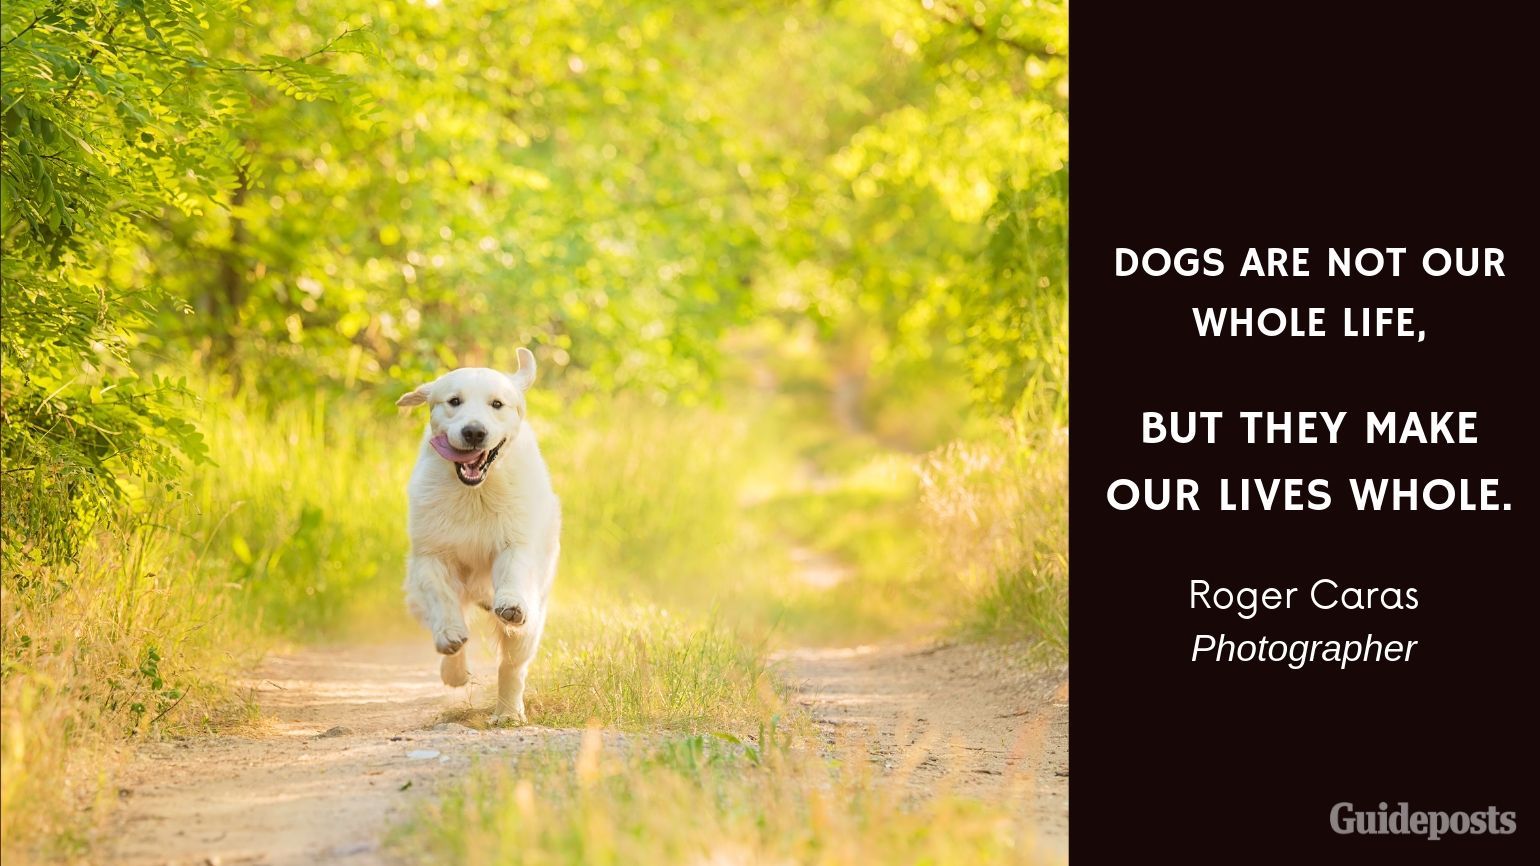 Sentimental Dog Quote: Dogs are not our whole life, but they make our lives whole. —Roger Caras, Photographer dog lover